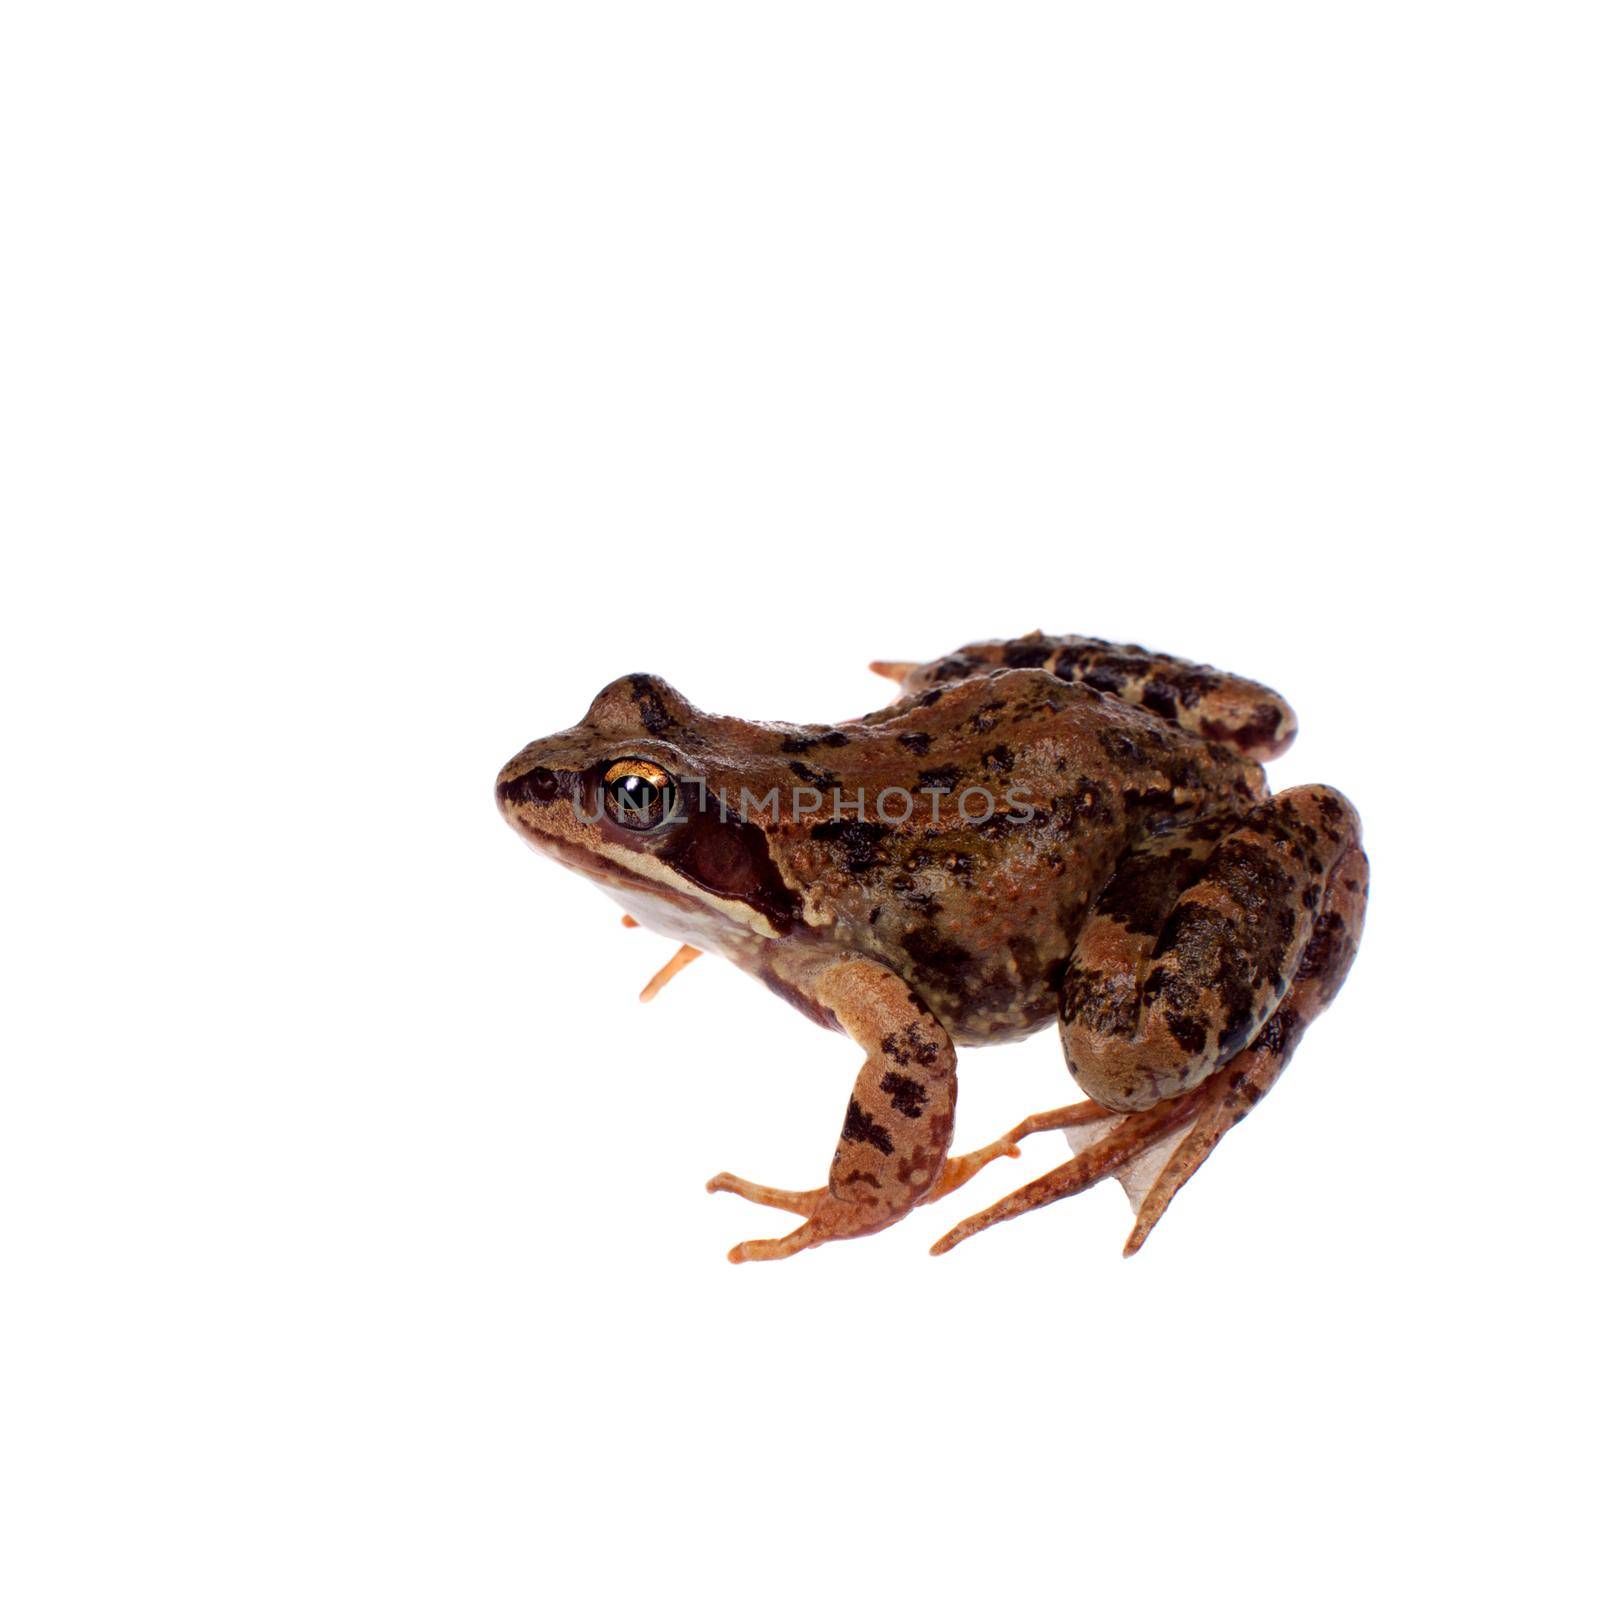 Common brown frog sitting on white background by RosaJay